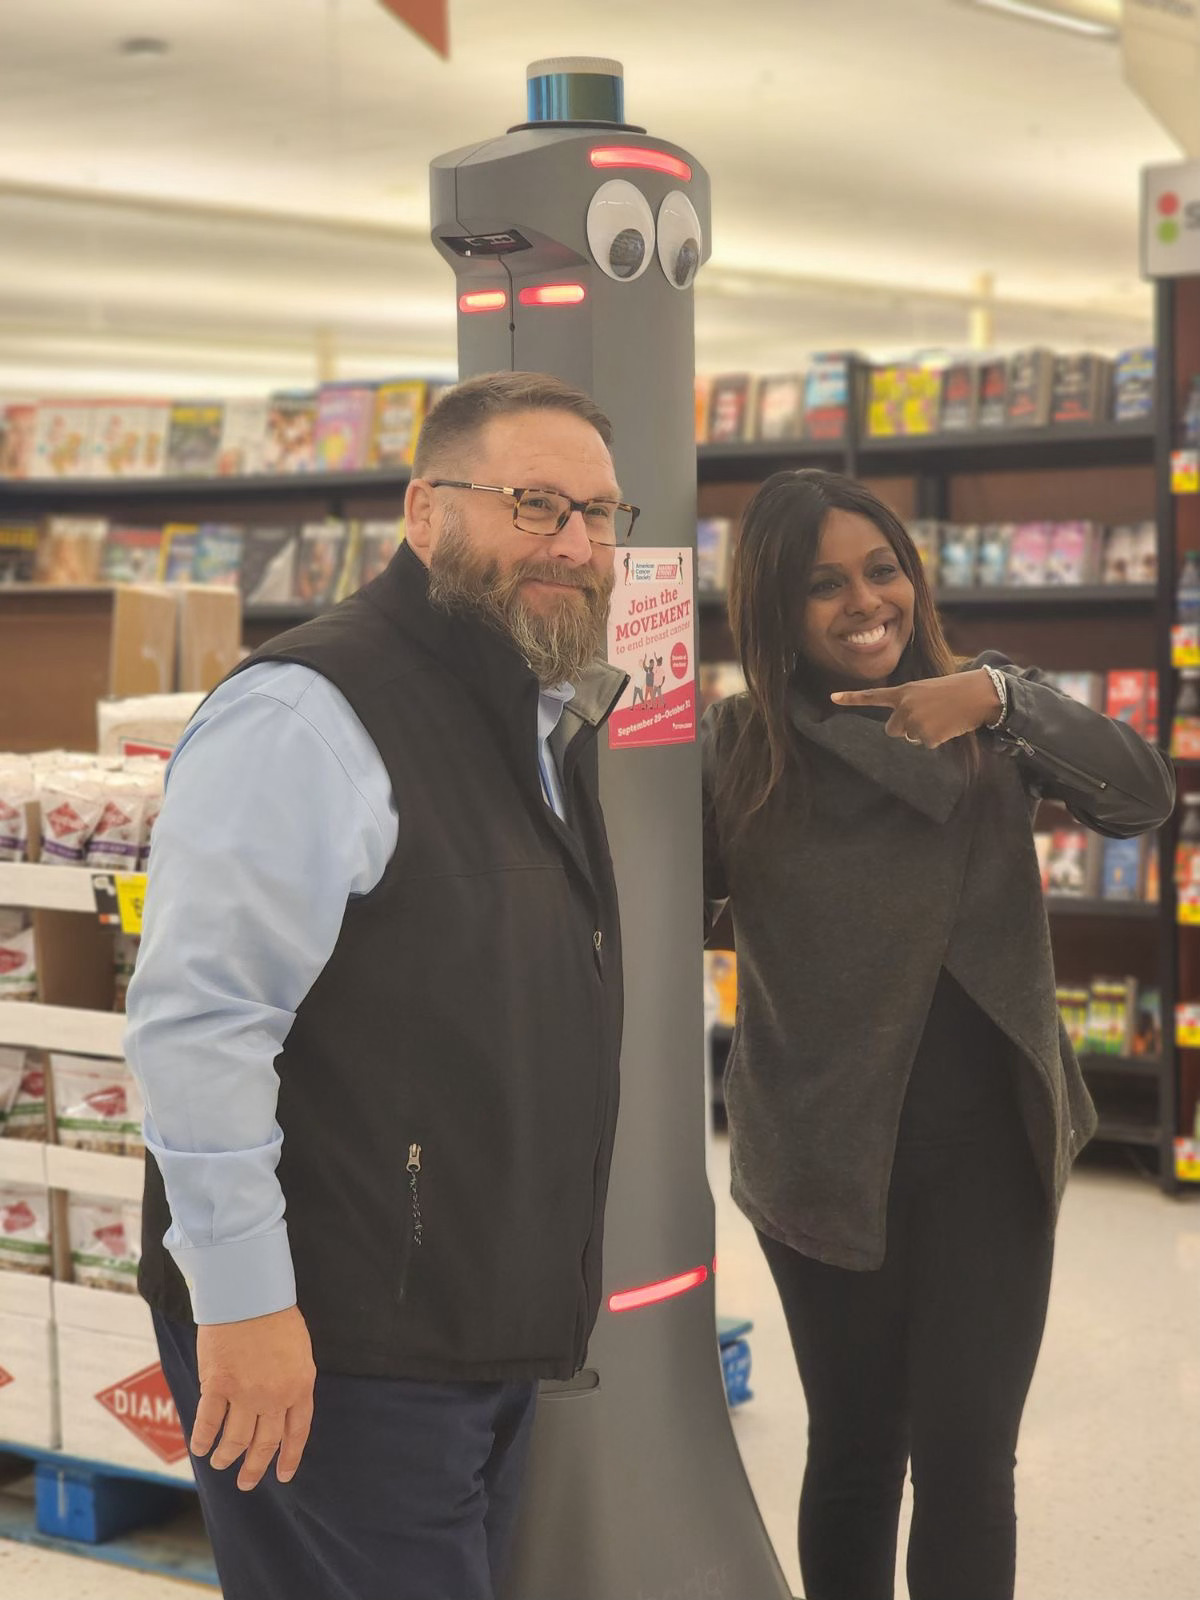 Two individuals smiling next to an end cap in a store aisle.